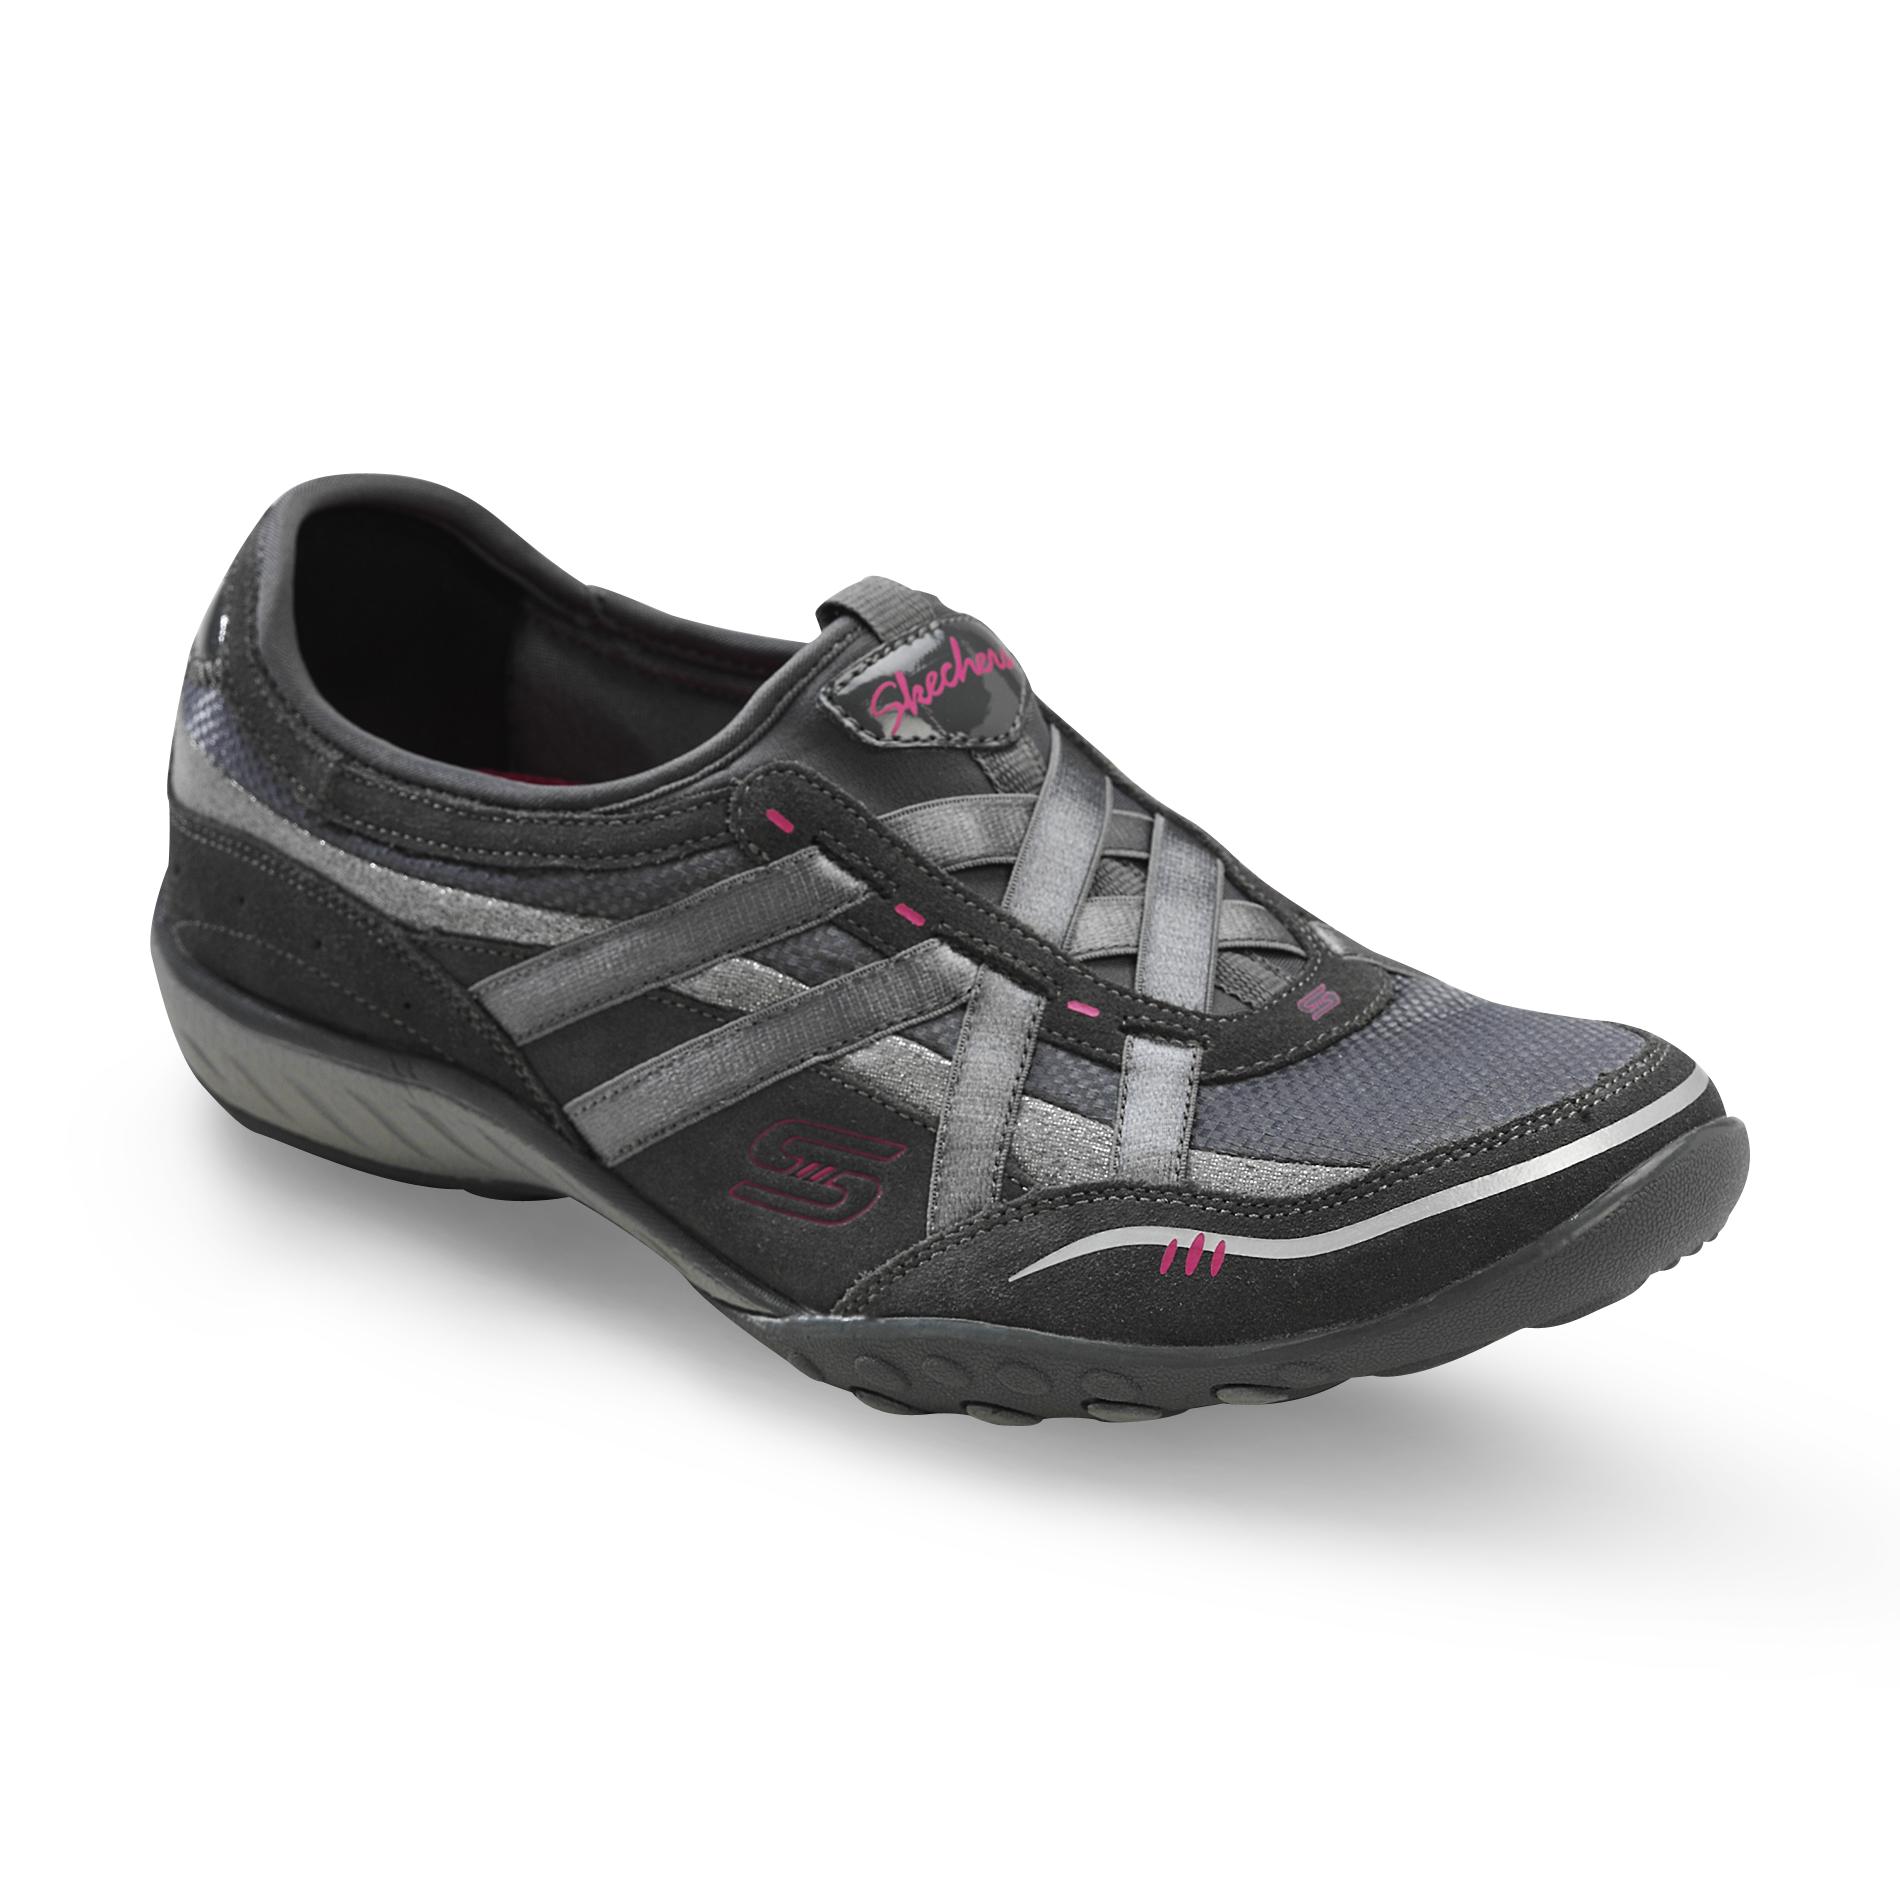 Skechers Women's Relaxed Fit Breathe Easy Casual Athletic Shoe - Grey